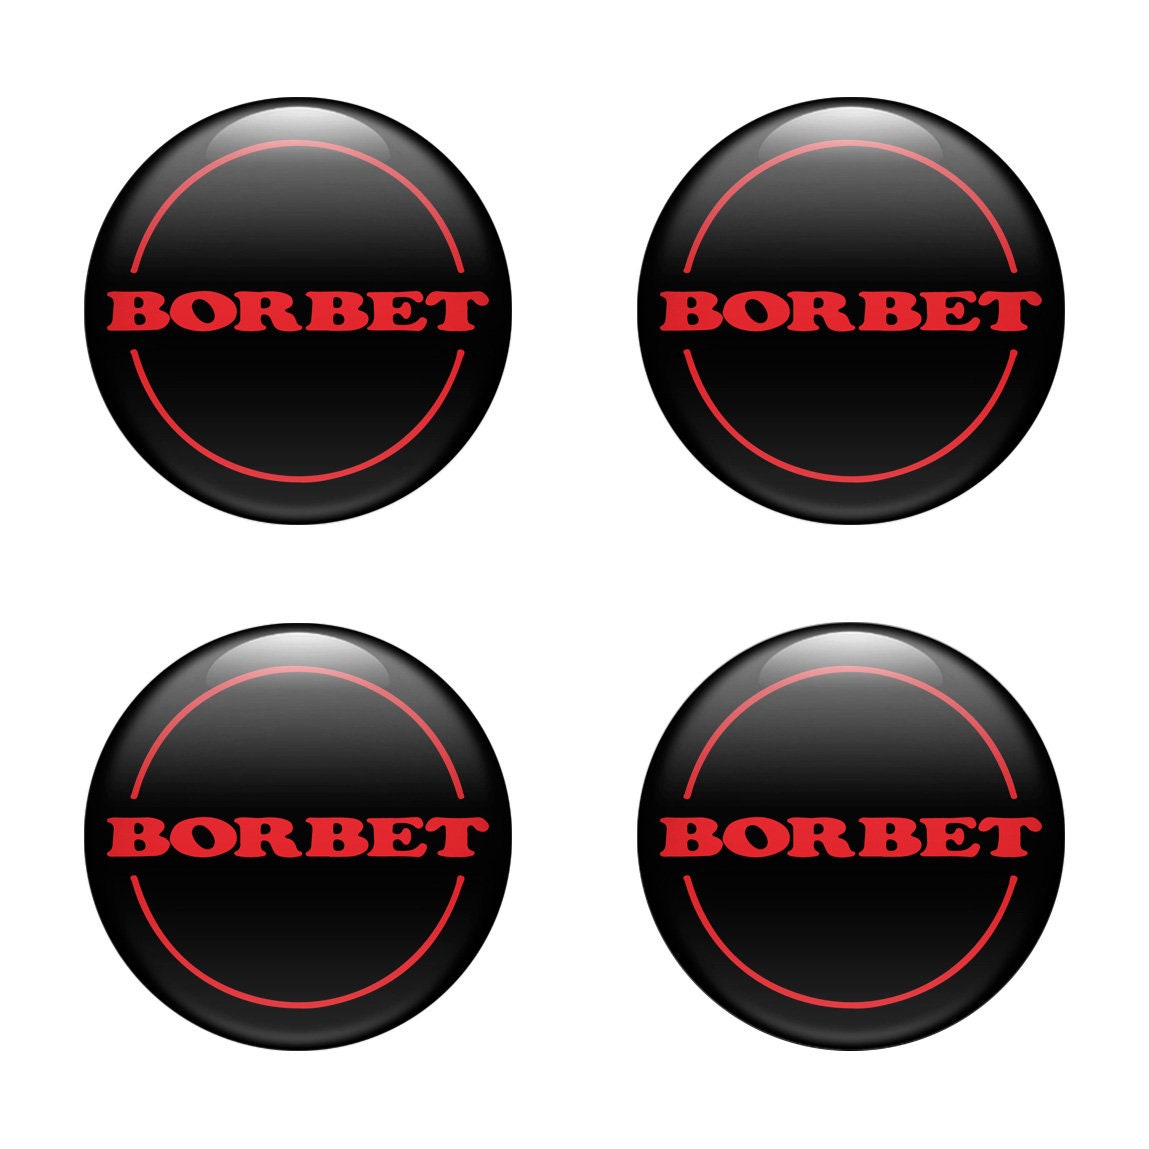 SET 4 x All sizes Print surface Logo Borbet Black Silicone Self adhesive  Stickers Domed Emblem For Wheels Center Hub Caps, Phone, laptop